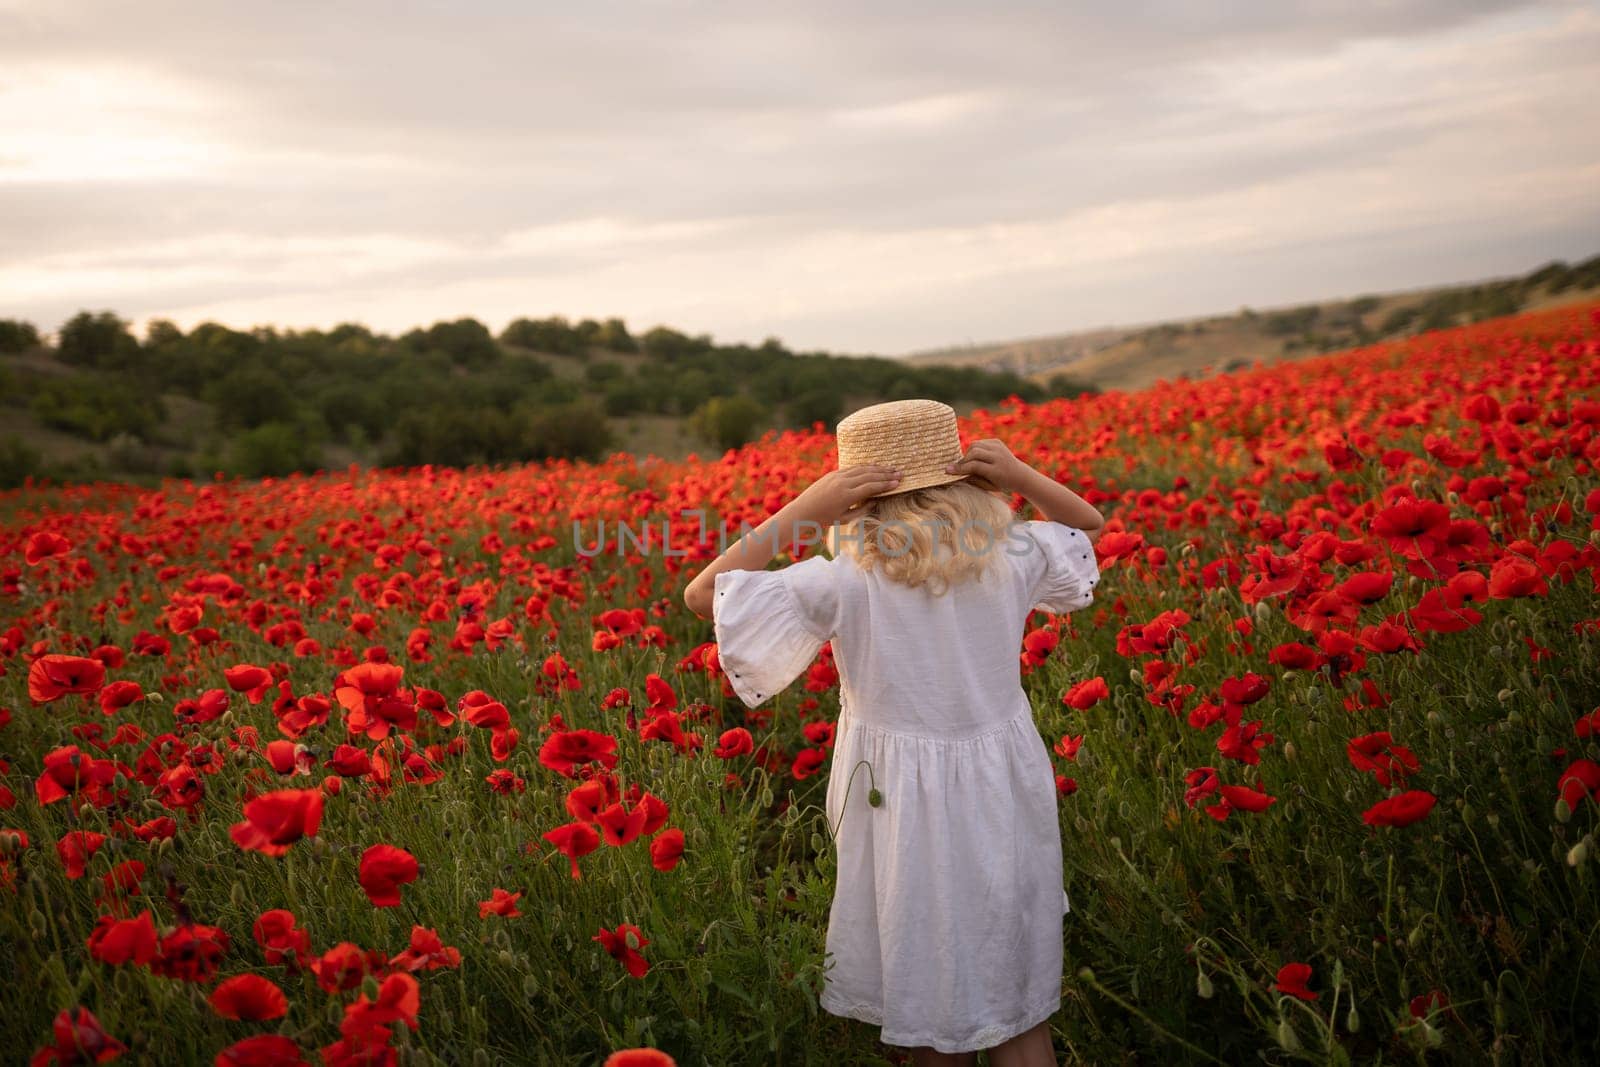 A young girl wearing a straw hat stands in a field of red poppies. The scene is serene and peaceful, with the girl looking out over the vast expanse of flowers